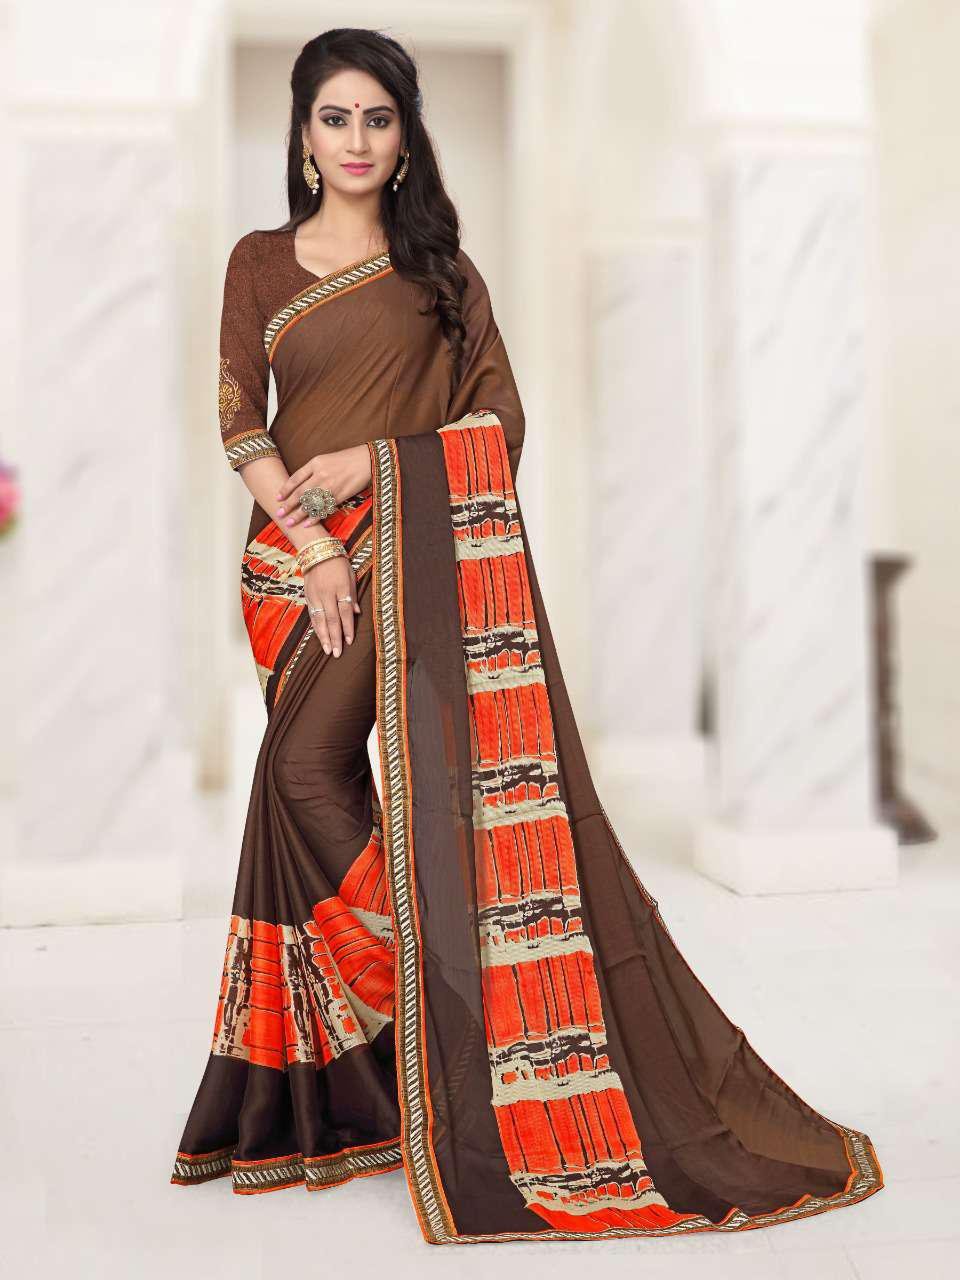 Women's Casual Chiffon Saree with Blouse Piece - TheHangr